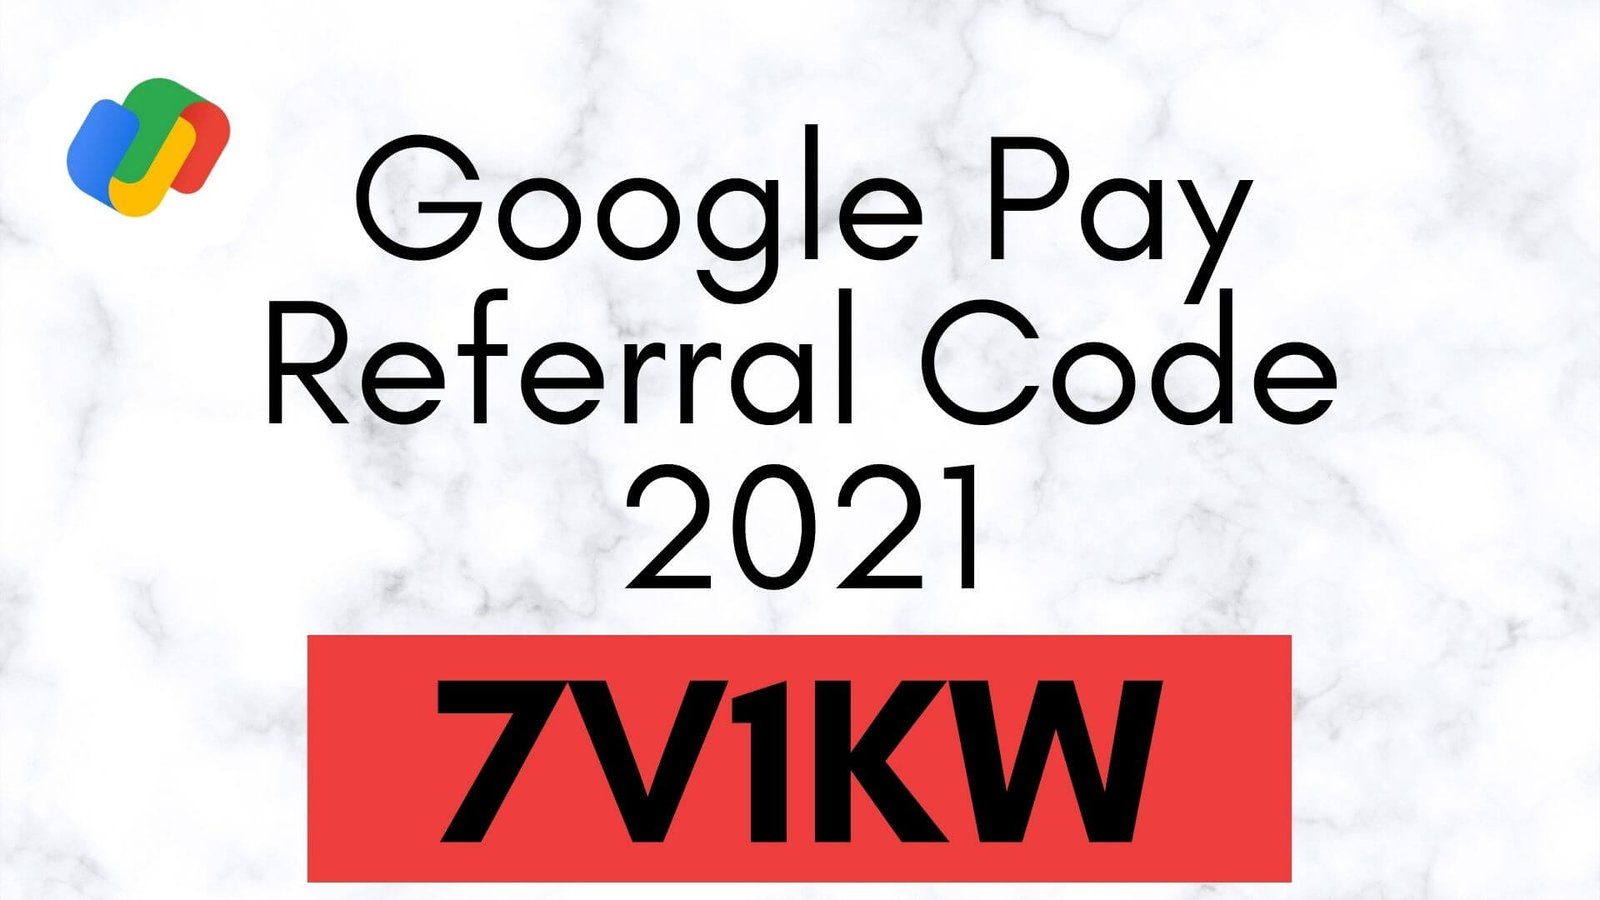 Google Pay Referral Code 2021